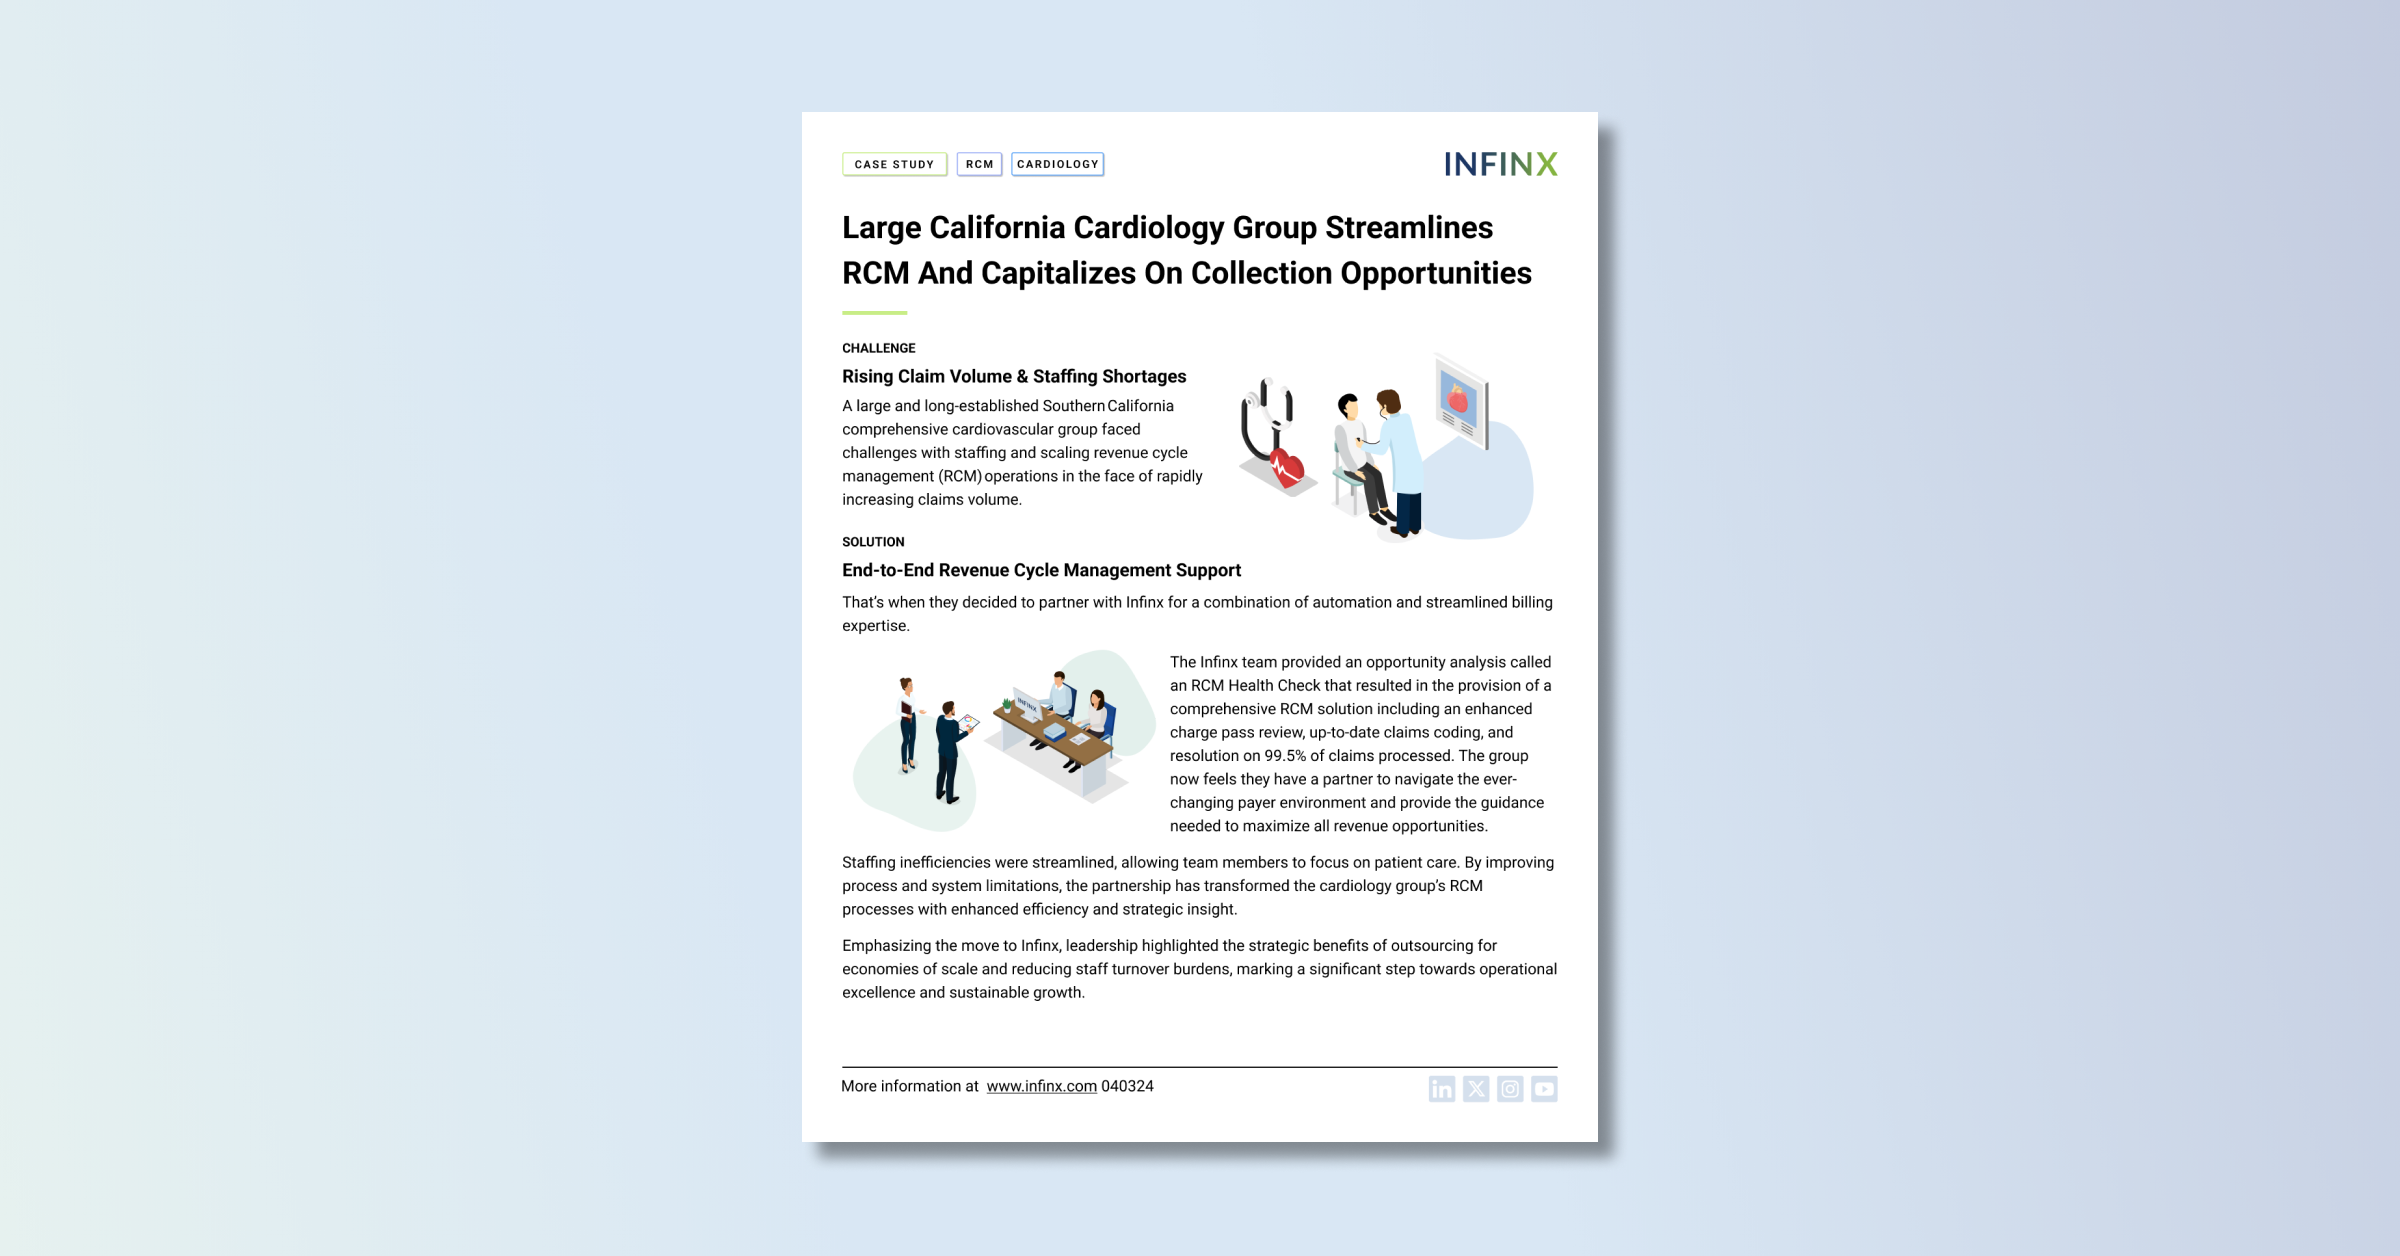 Infinx - Case Study - Large Cardiology Group Streamlines RCM And Capitalizes On Collection Opportunities - Featured Image